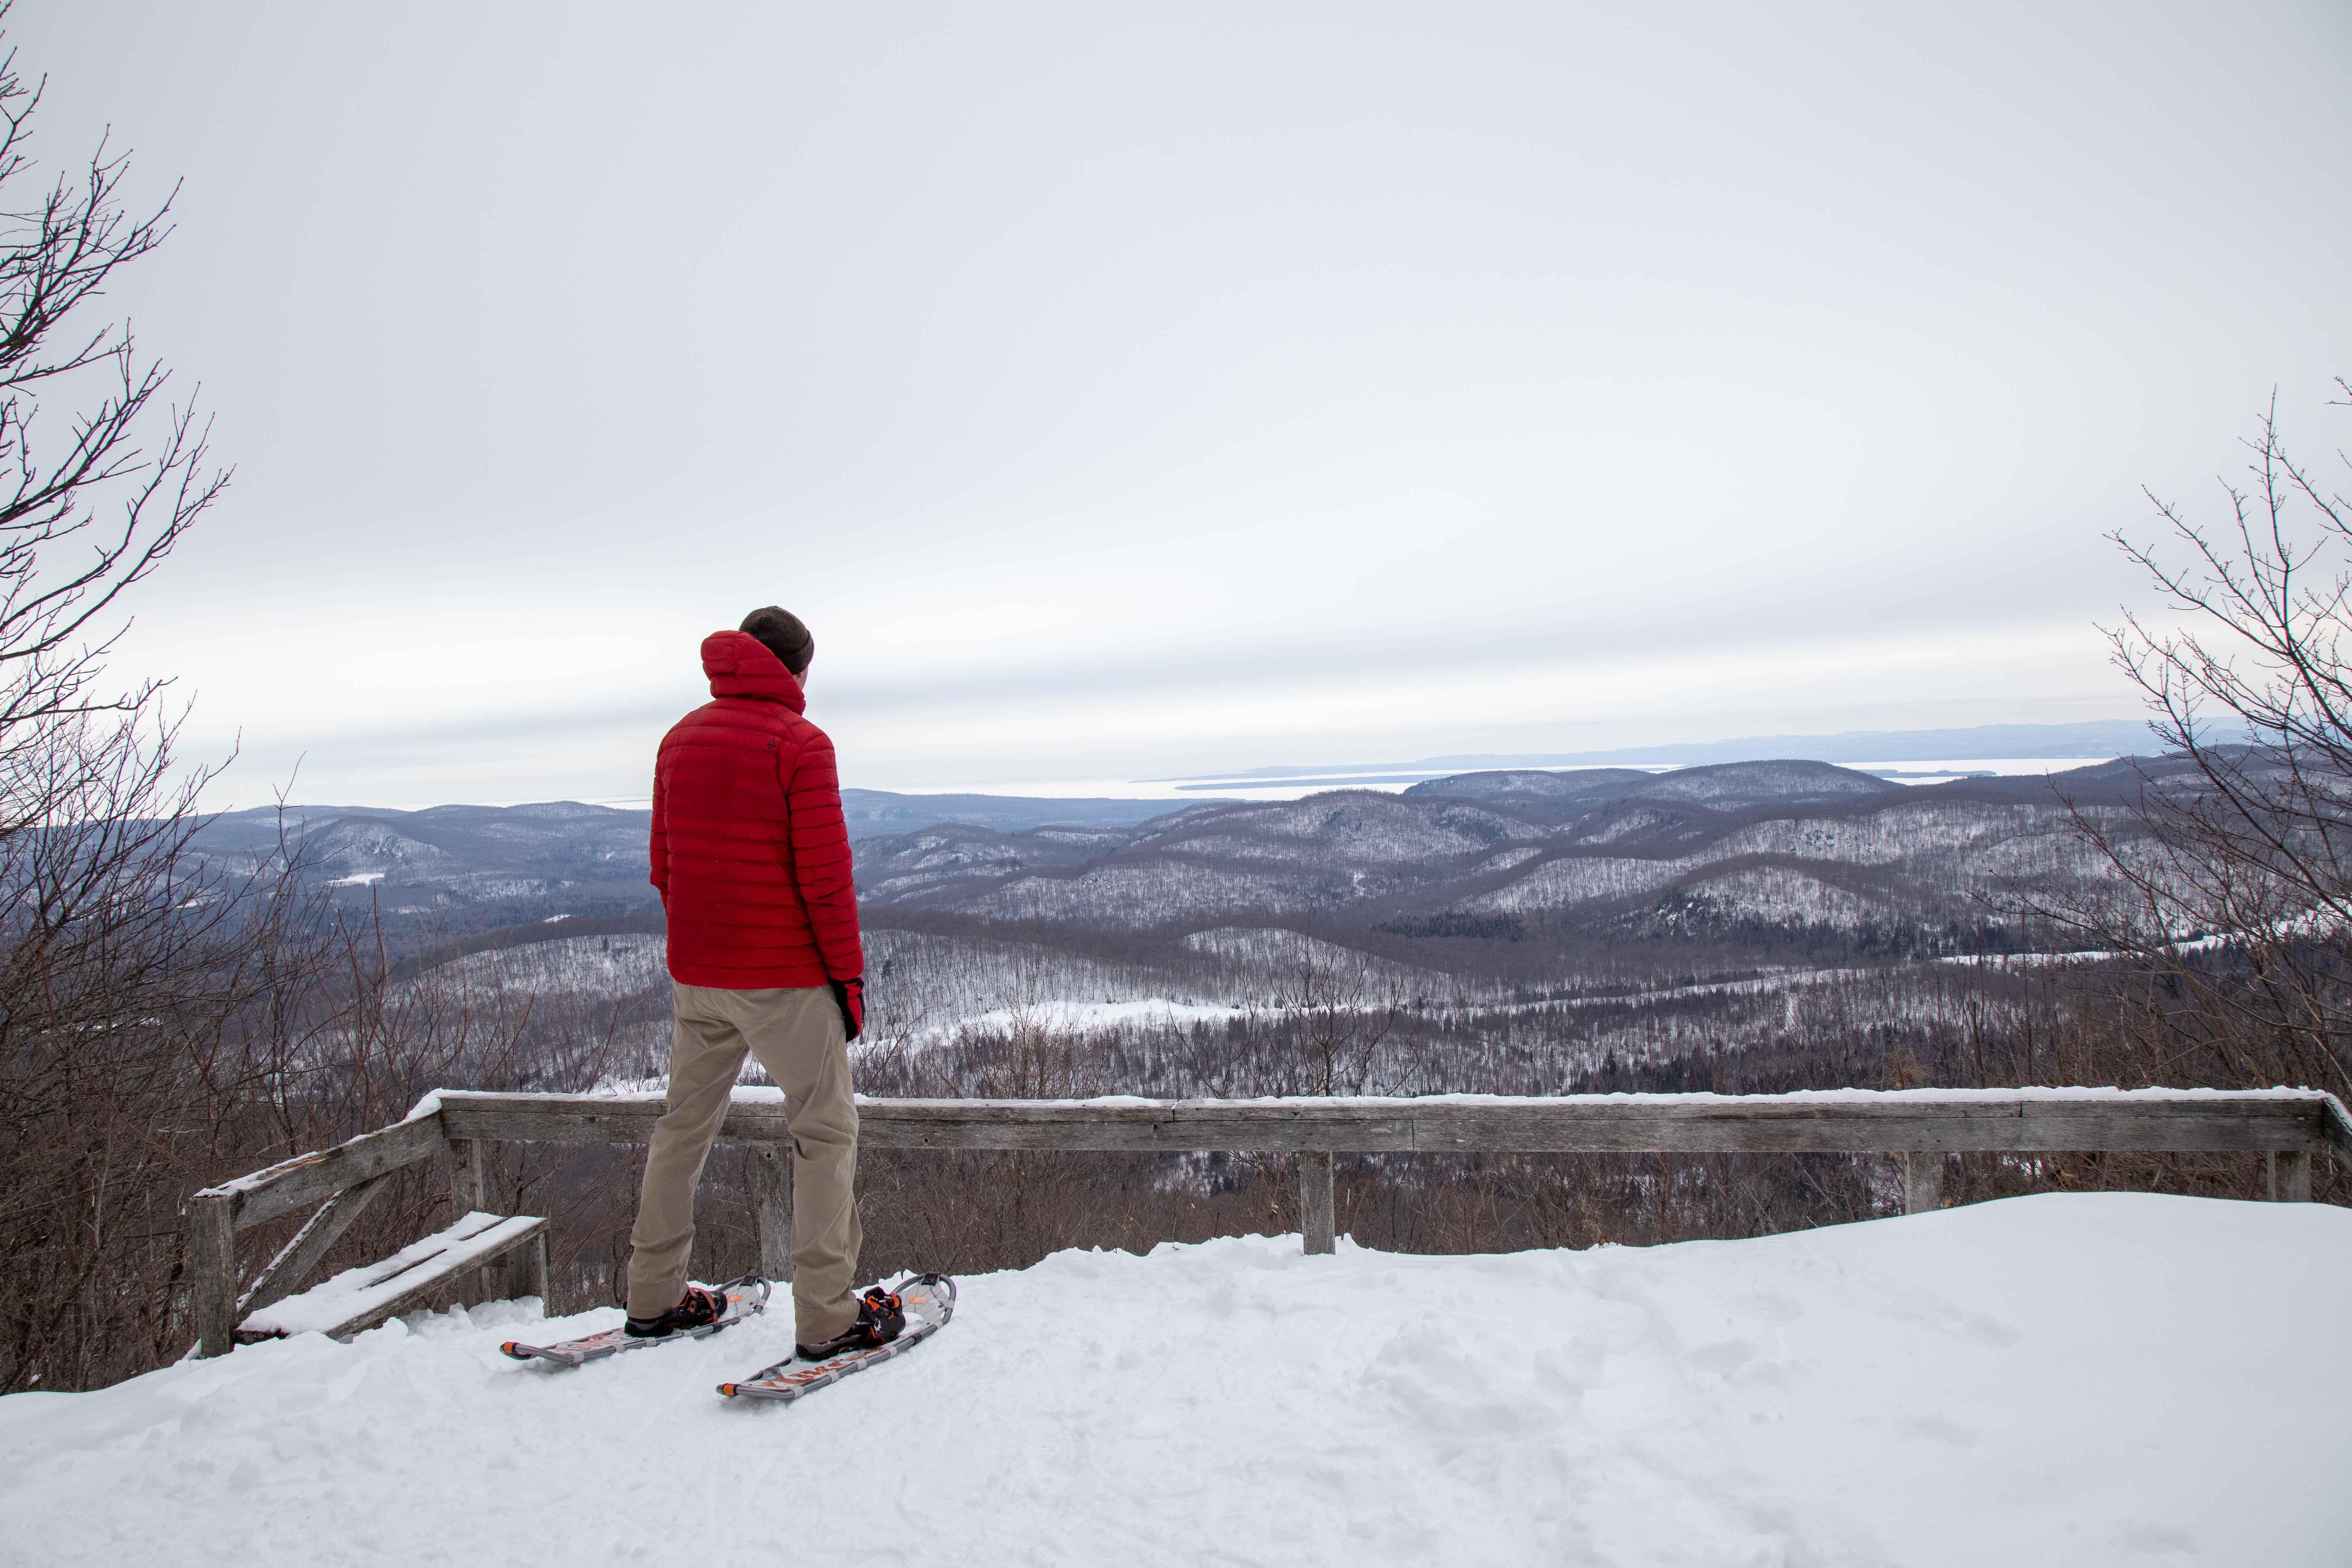 a person wearing snowshoes looks out at a hilly winter view